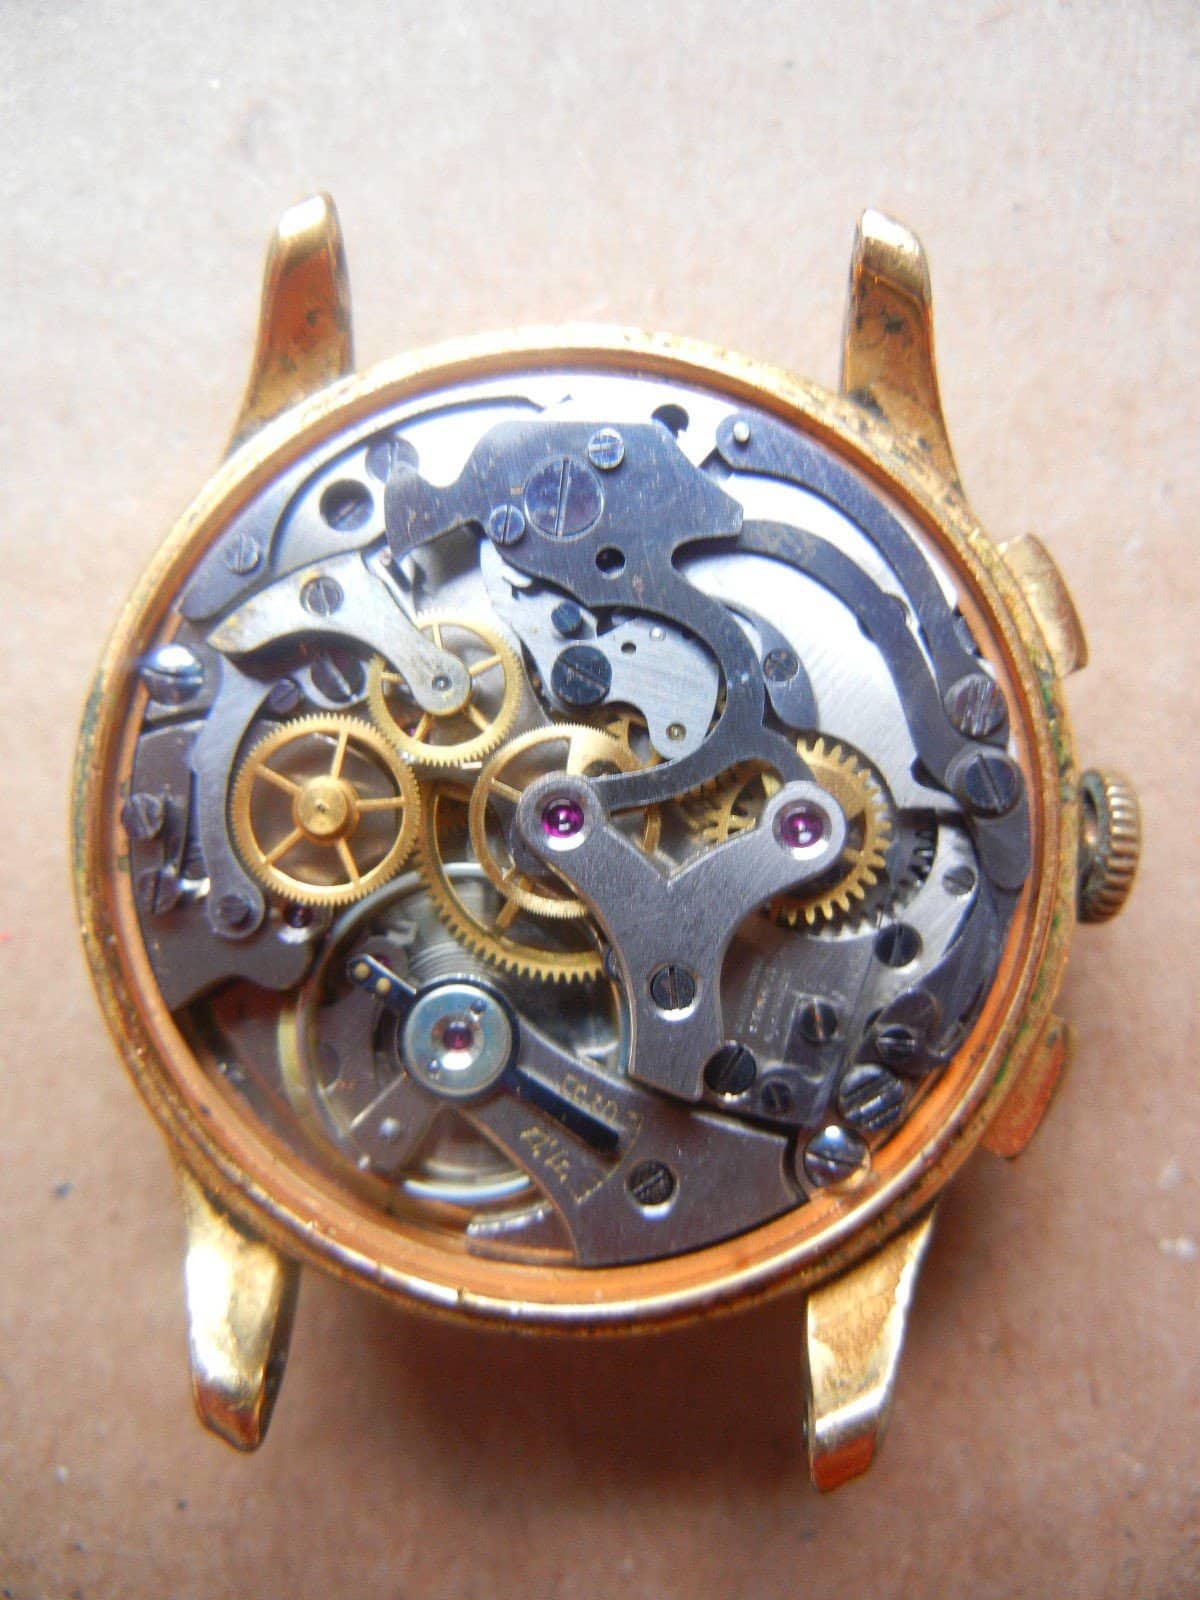 Venus caliber 188 movement - specifications and photo